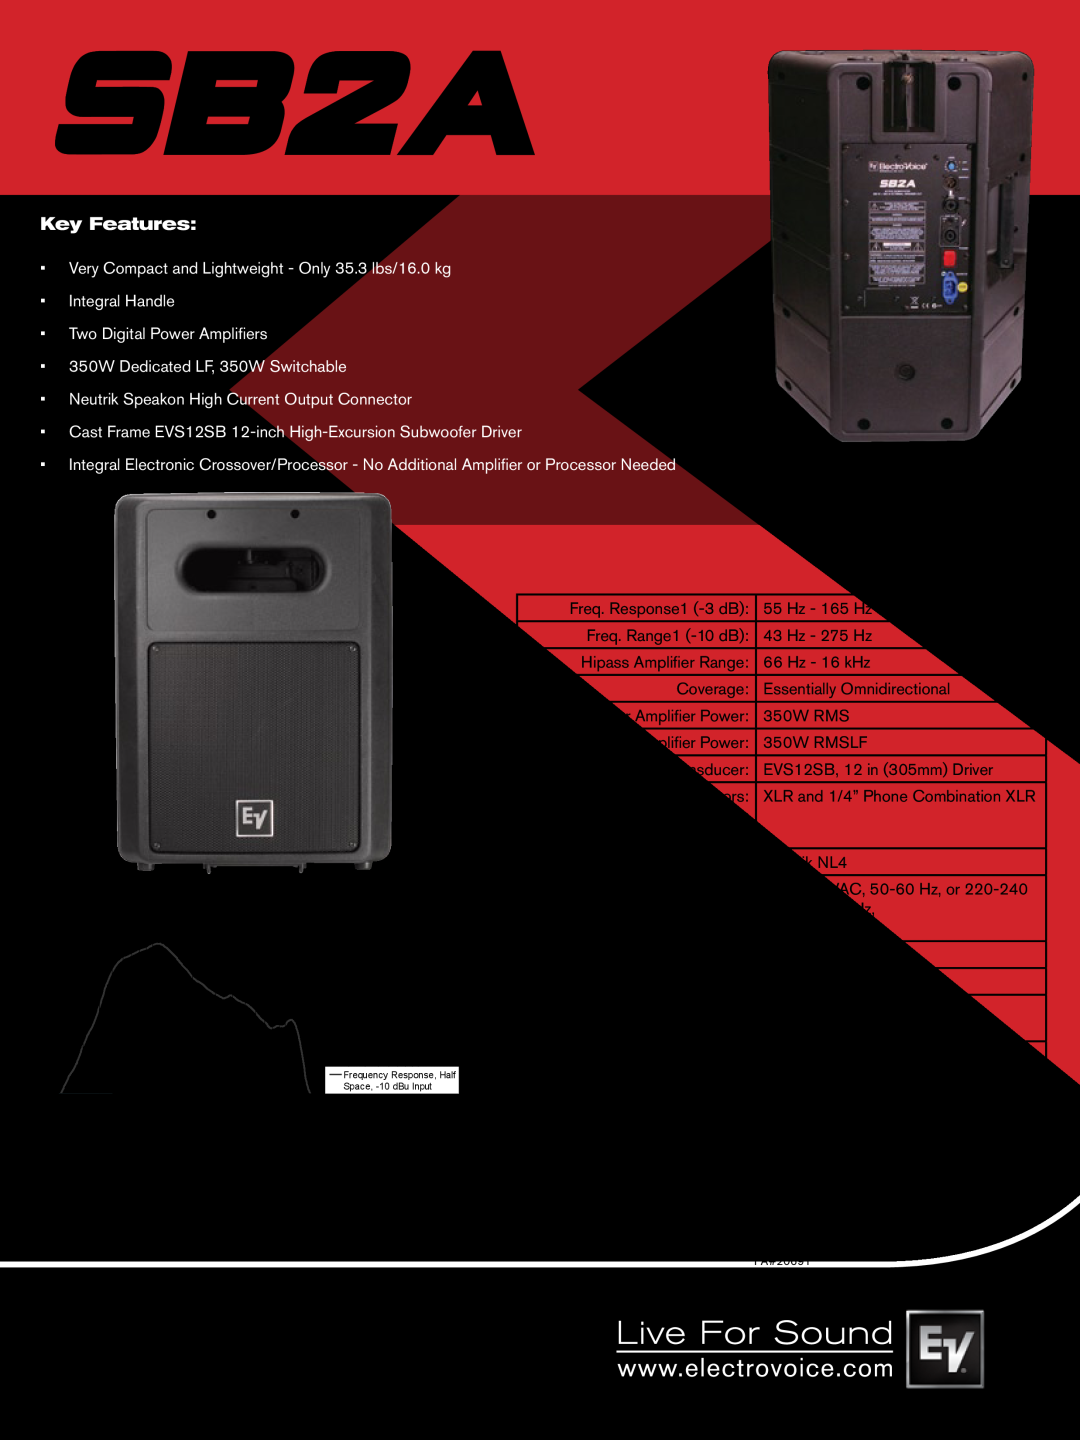 Electro-Voice SB2A manual Key Features, Frequency Response 